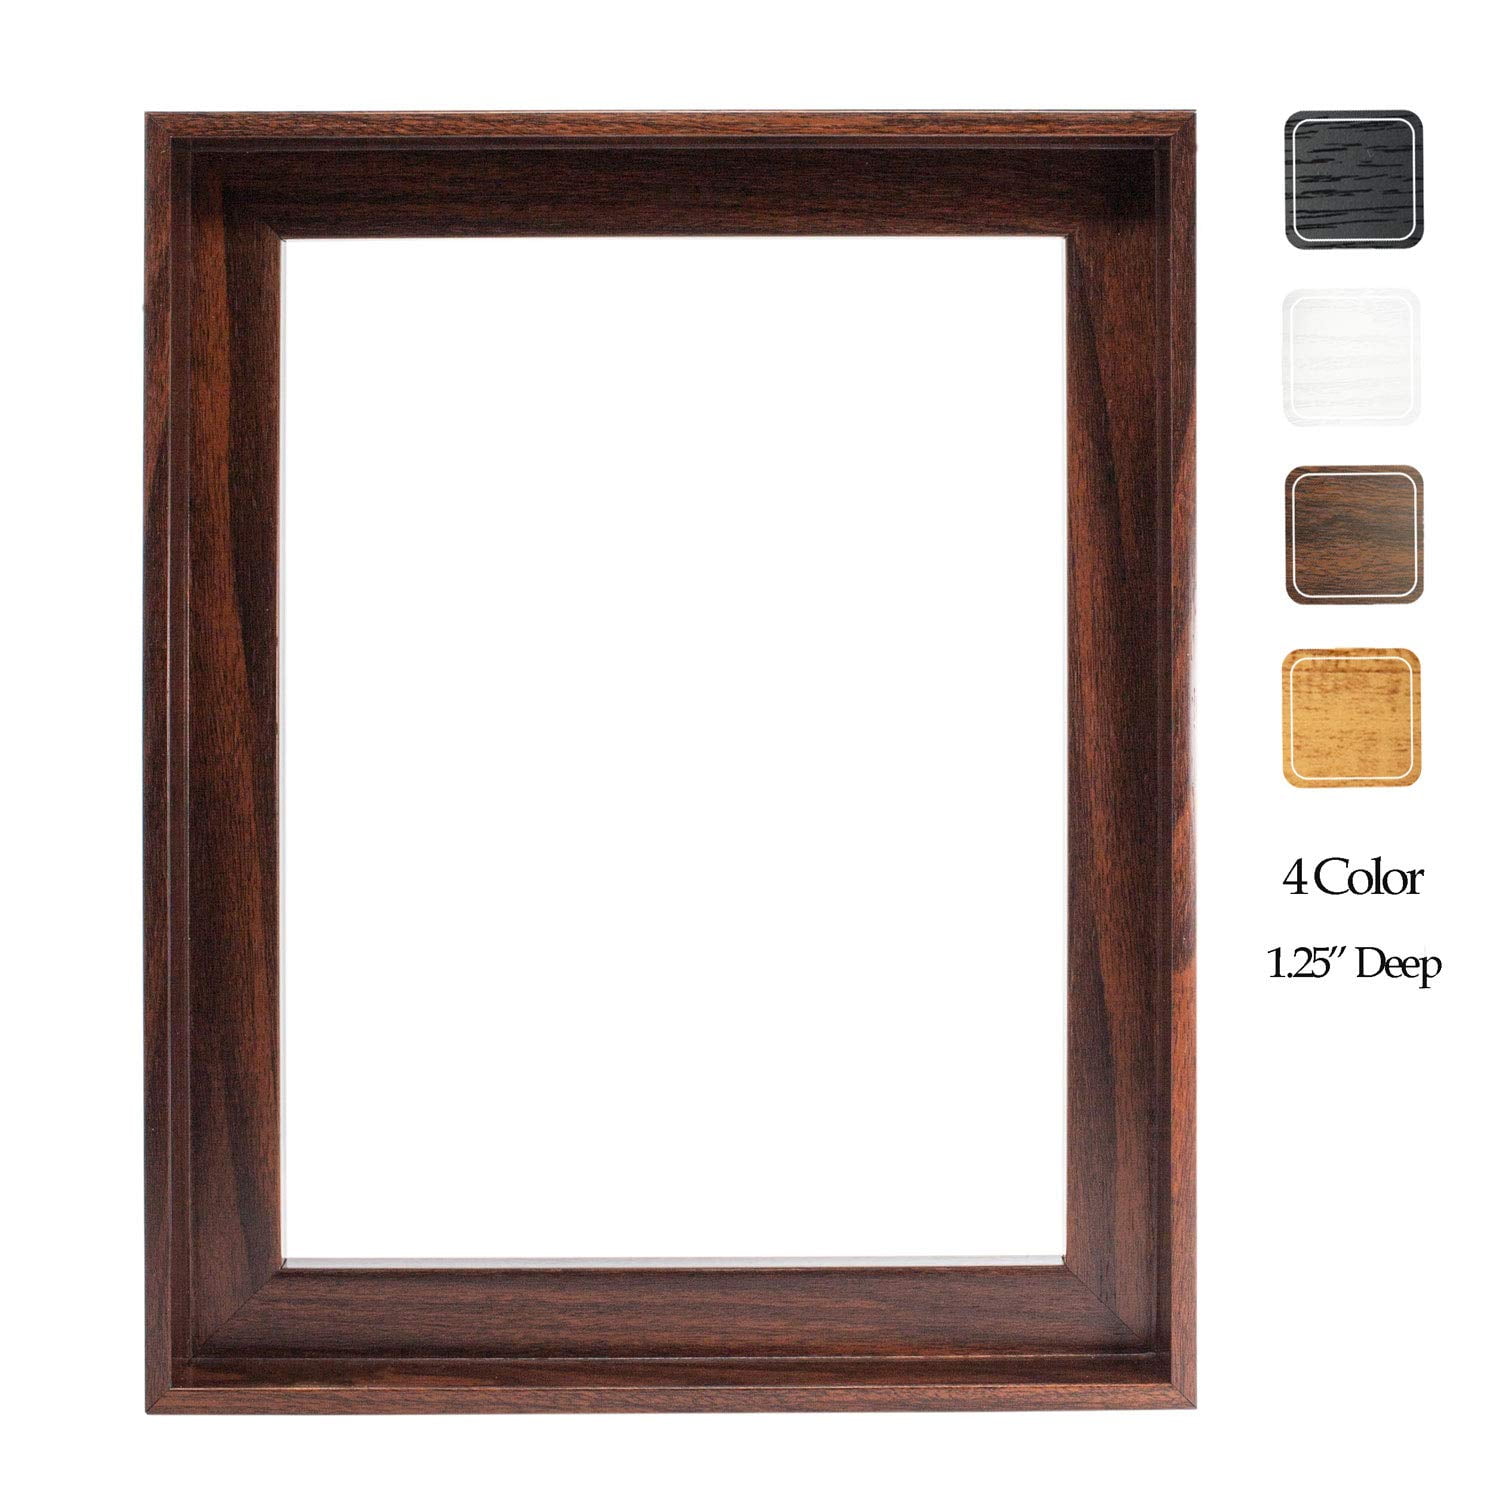 Thin Black Picture Frame 16x12 inches 16x12 Thin Black Frame Natural Wood 16x12 Black Frames All Wooden 12x16 Black Picture Frames are made from SOLID WOOD and comes with REAL GLASS